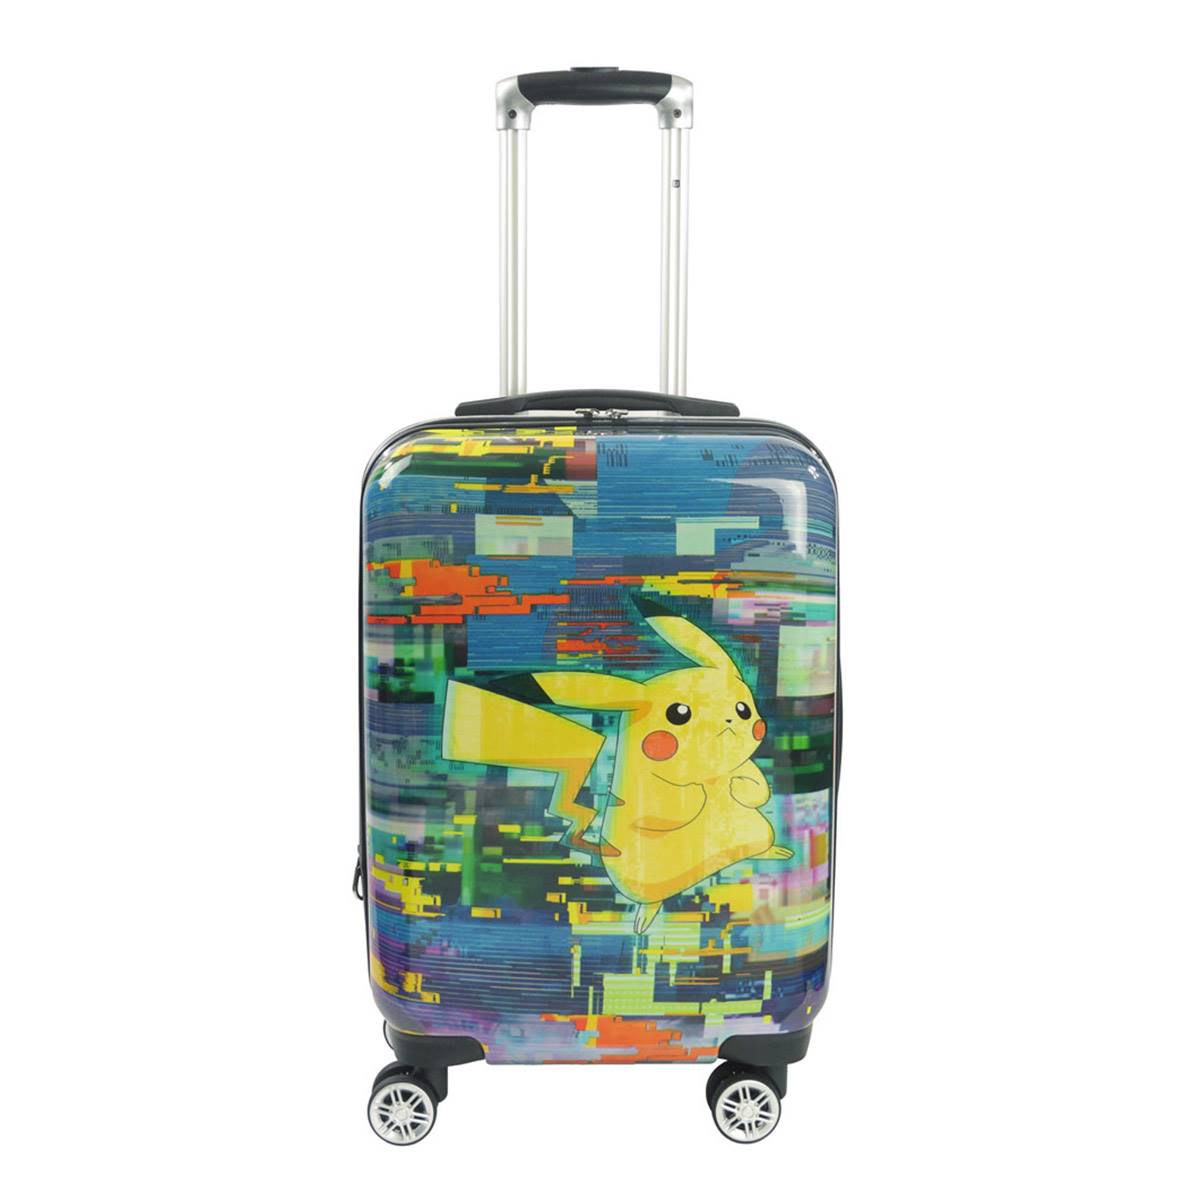 FUL 21in. Pokemon Hardside Carry-On Spinner Luggage